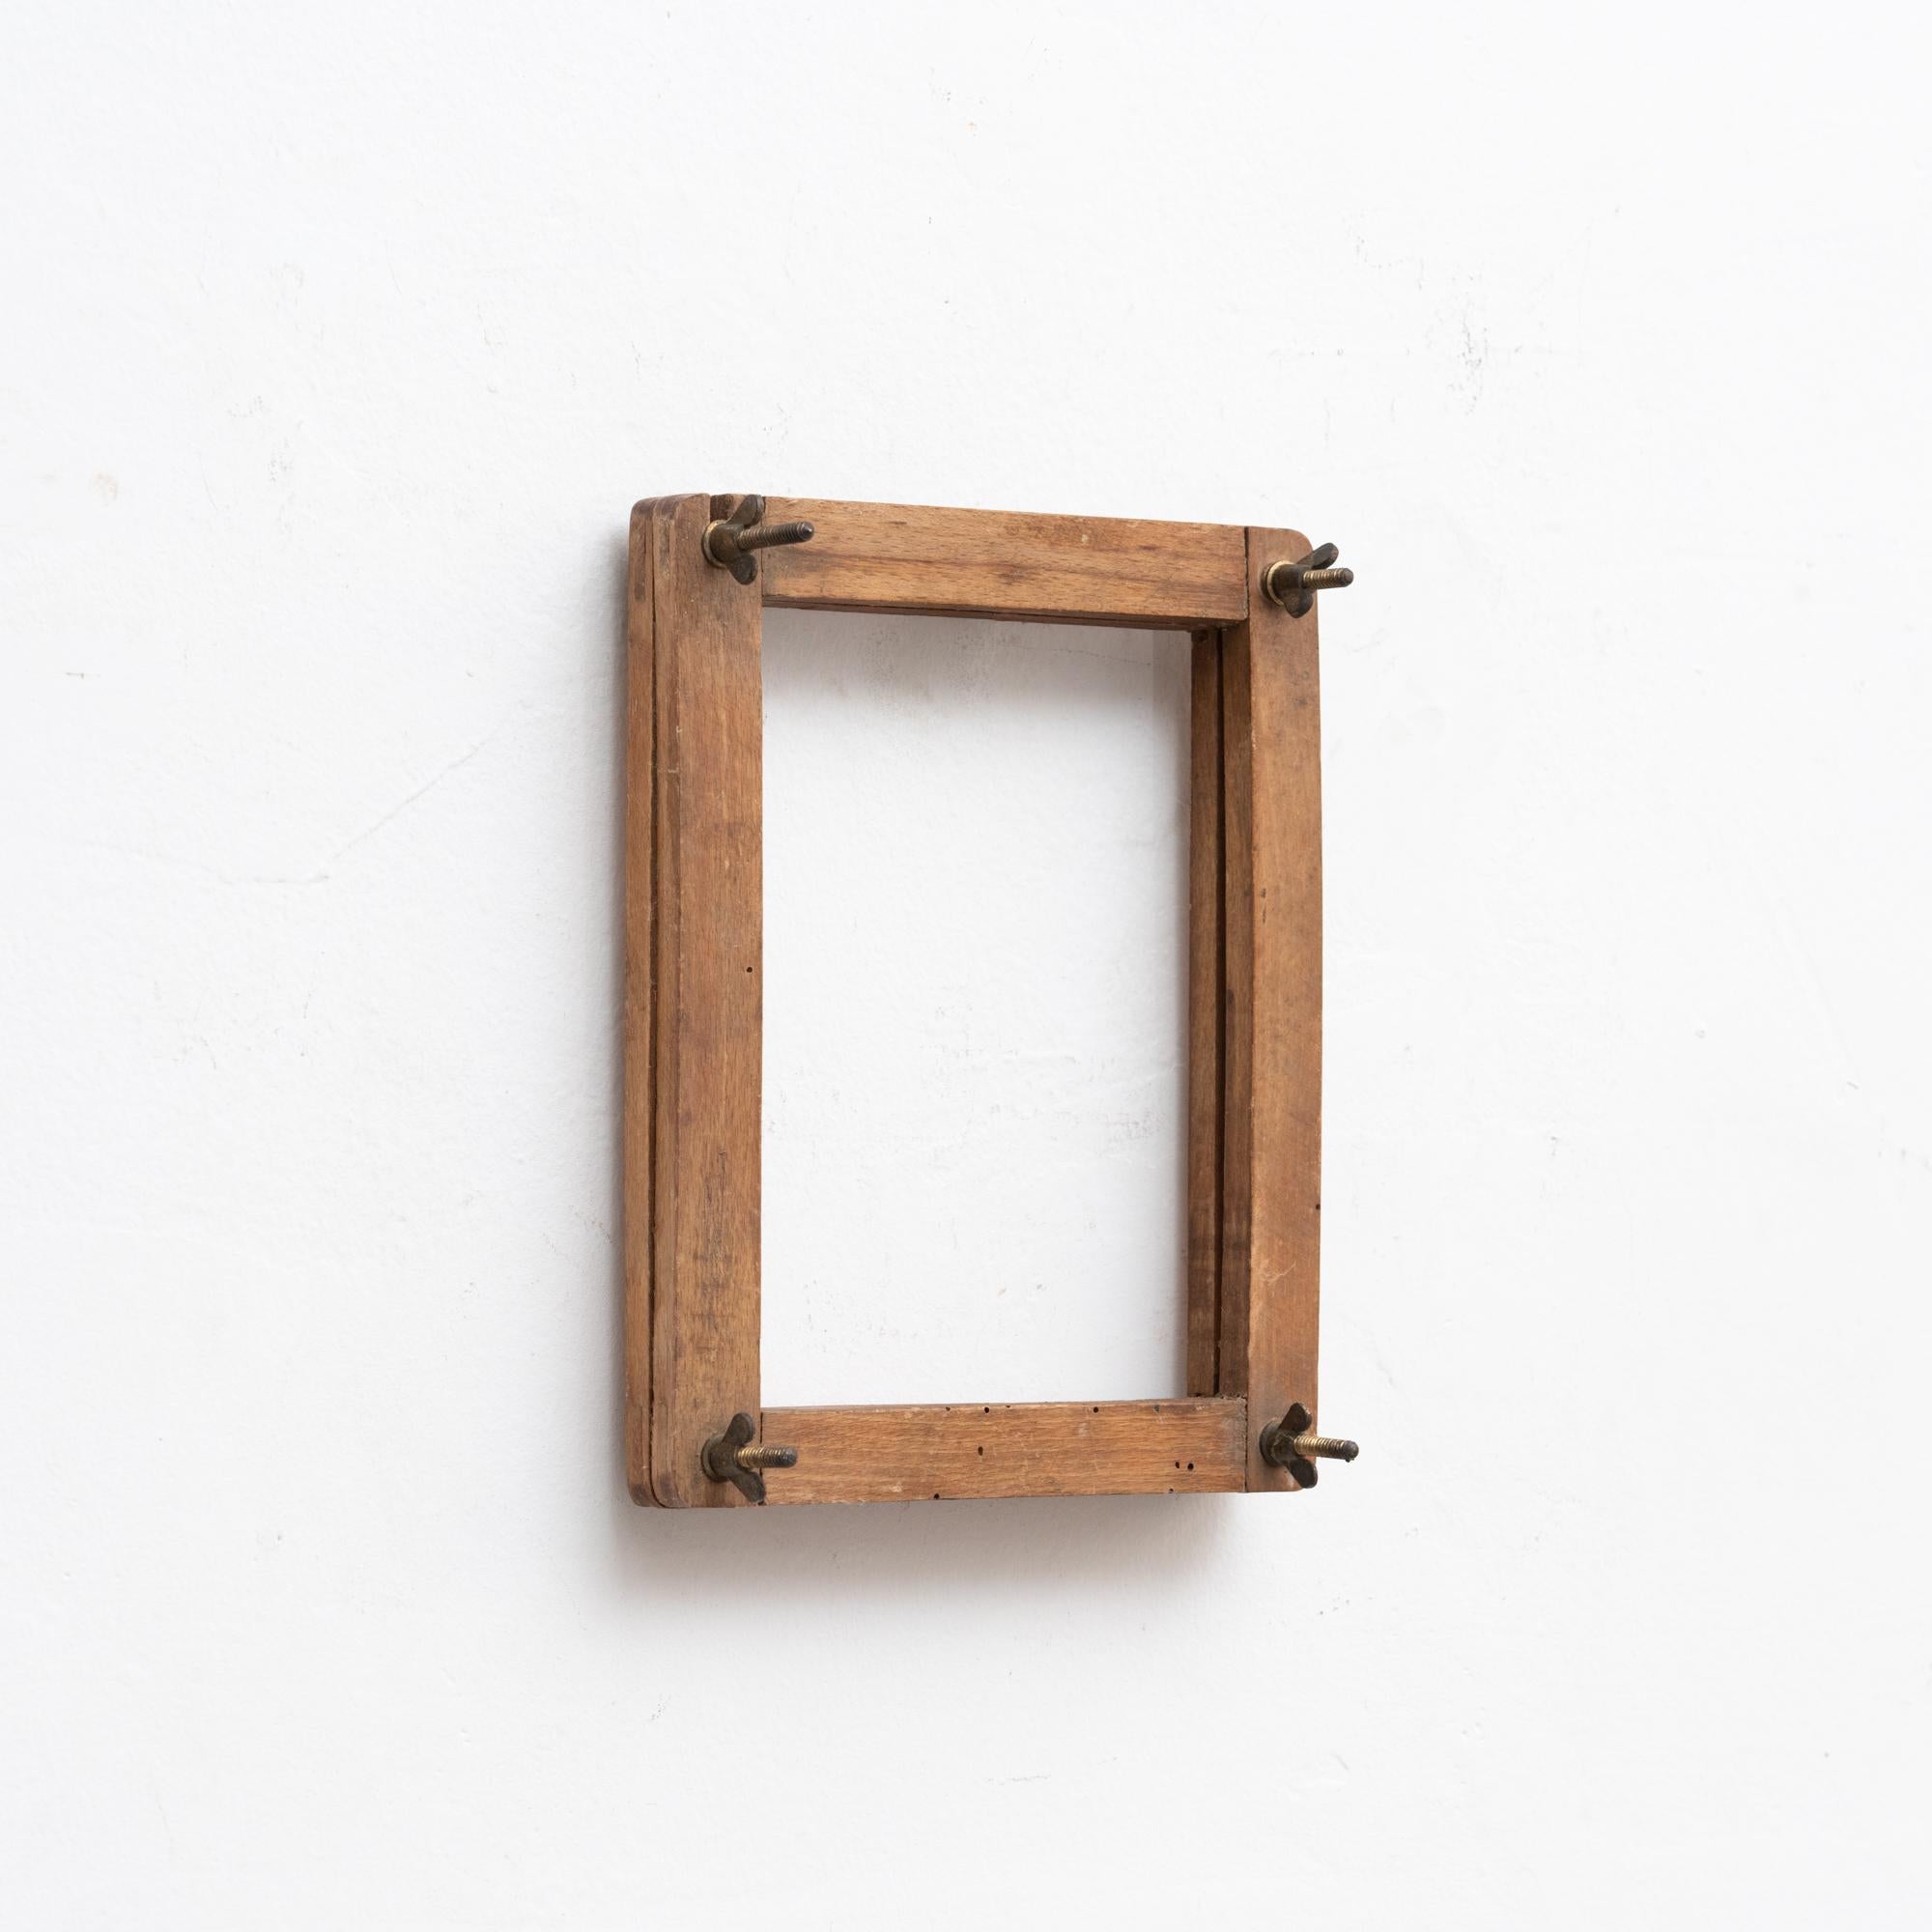 Vintage wooden photography plate frame, made by unknown artisan.

Manufactured in Spain, circa 1930.

In good original condition, with minor wear consistent with age and use, preserving a beautiful patina.

Materials:
Metal
Wood

